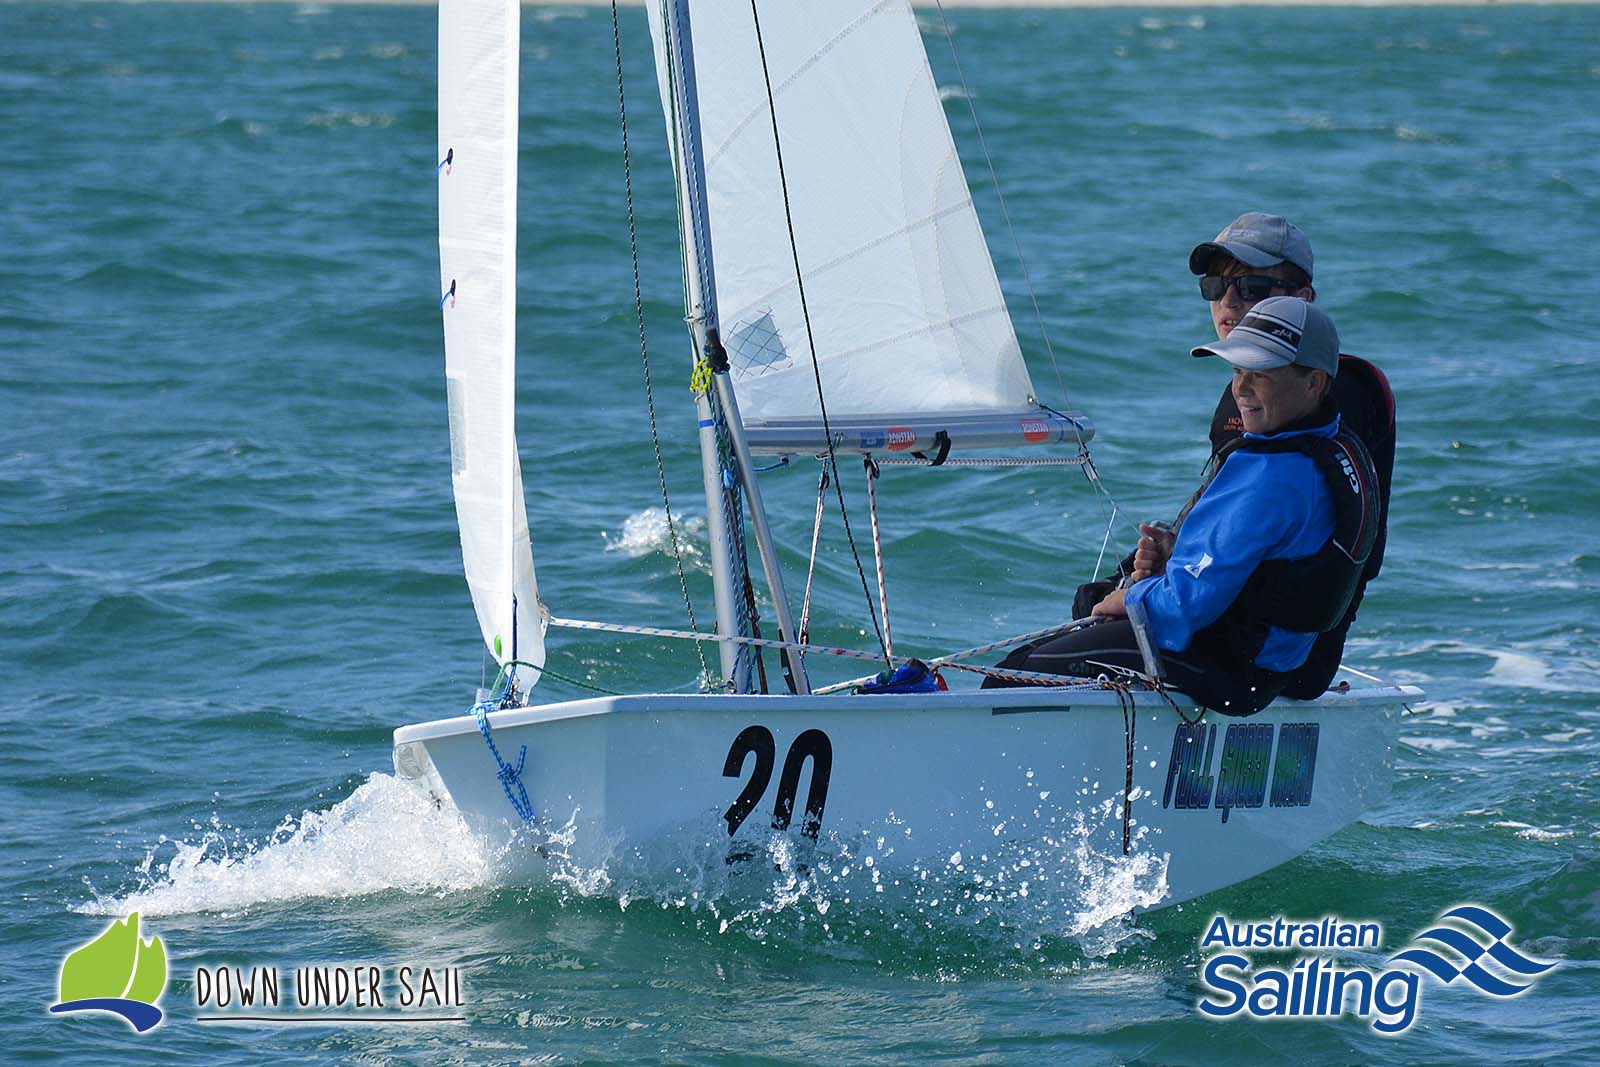 Sam Paynter and Gil Casanova in Full Speed Ahead were the International Cadet winners at last year's SA Youths.